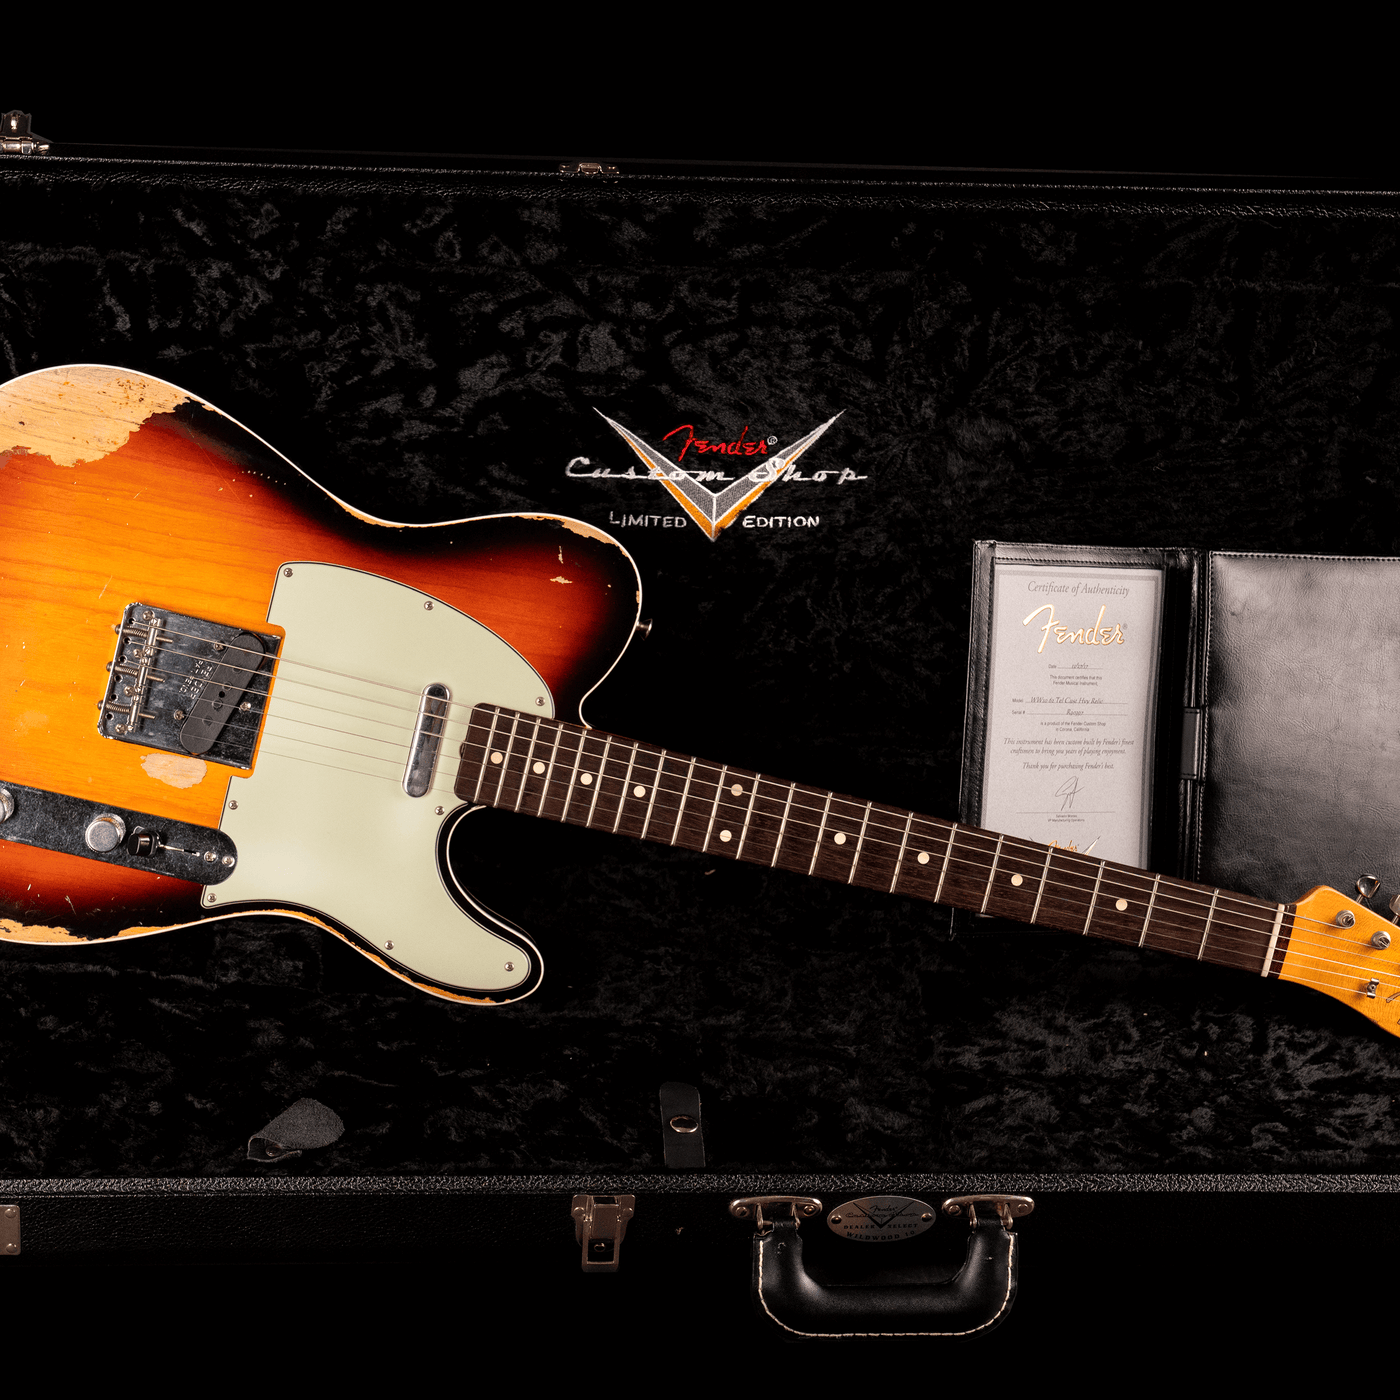 Fender Custom Shop Telecaster Sunburst Heavy Relic 2017 - $4999990 - Gearhub - Fender Custom Shop 1952 Telecaster Heavy Relic Tobacco SunburstThe dedicated craftspeople at the Fender Custom Shop have been recreating some of the legendary company's most iconic instruments for over 30 years. One of the most beloved, and recognizeable of those guitars, is the 1952 Telecaster. Although this particular model had been available in music stores since 1950, under the name Broadcaster, then without a name at all, it